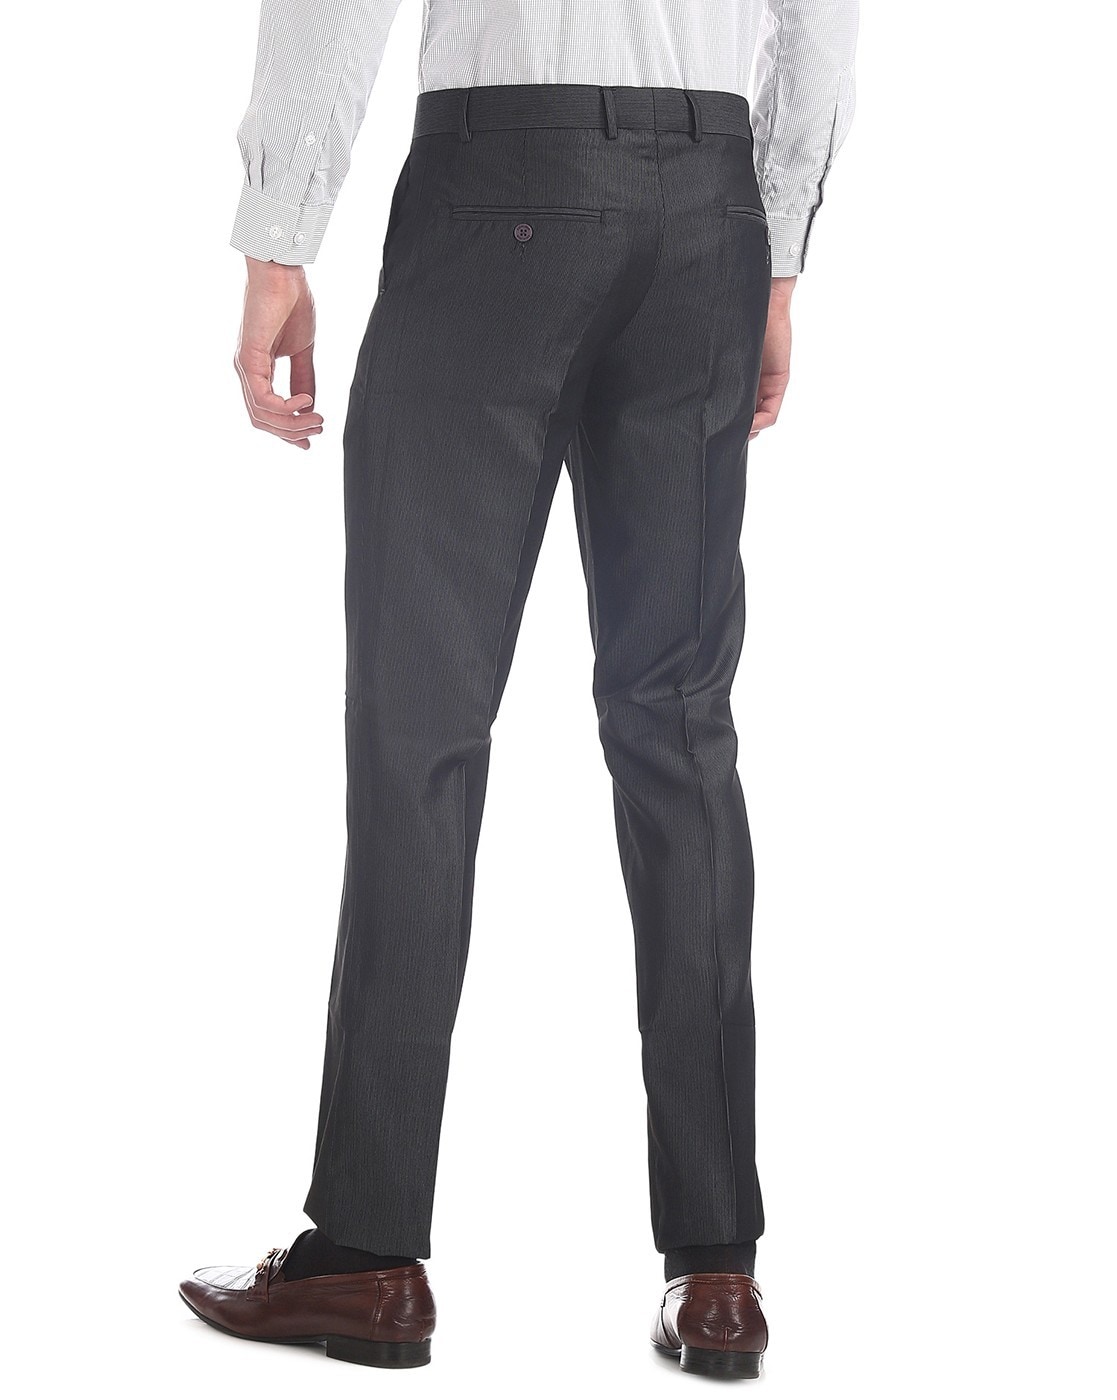 WHOLESALE ONLY 100% ORIGINAL EXCALIBUR Men's Formal Pants With Mrp Tags &  Brand Mentioned Bill - Clothing in Ludhiana, 178203200 - Clickindia